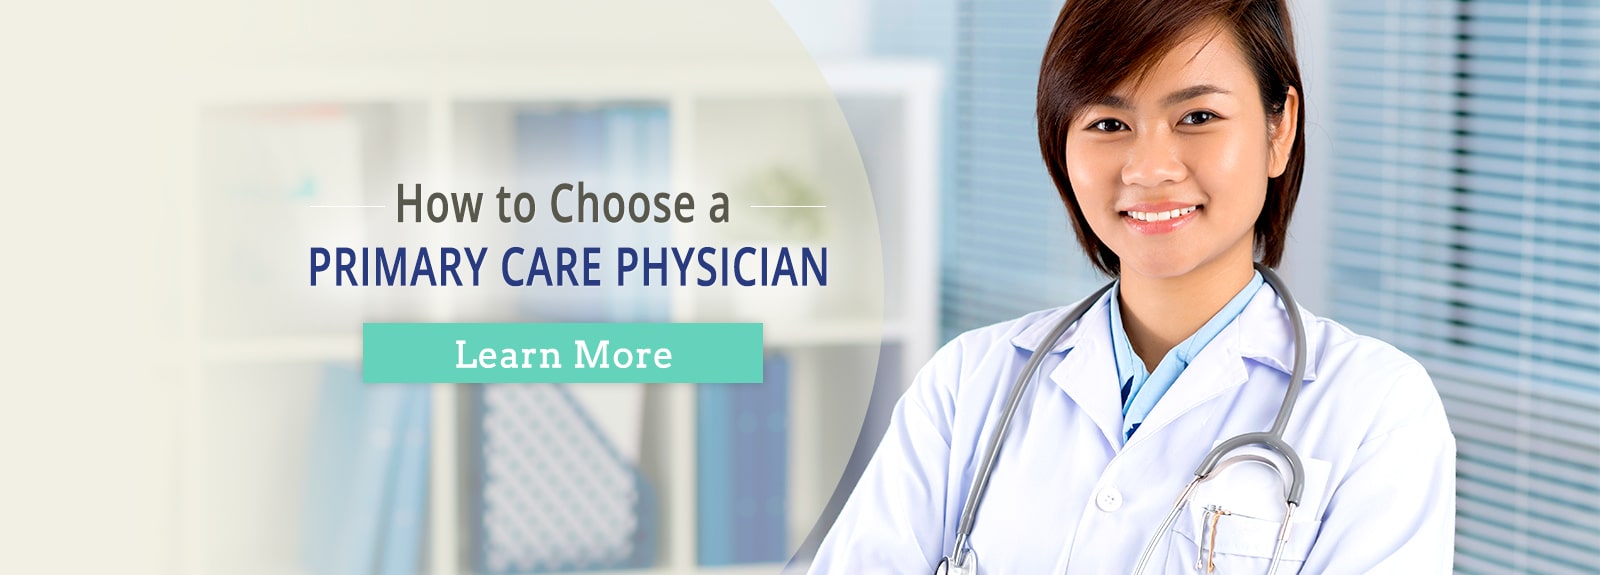 How to Choose a PRIMARY CARE PHYSICIAN. Learn More.